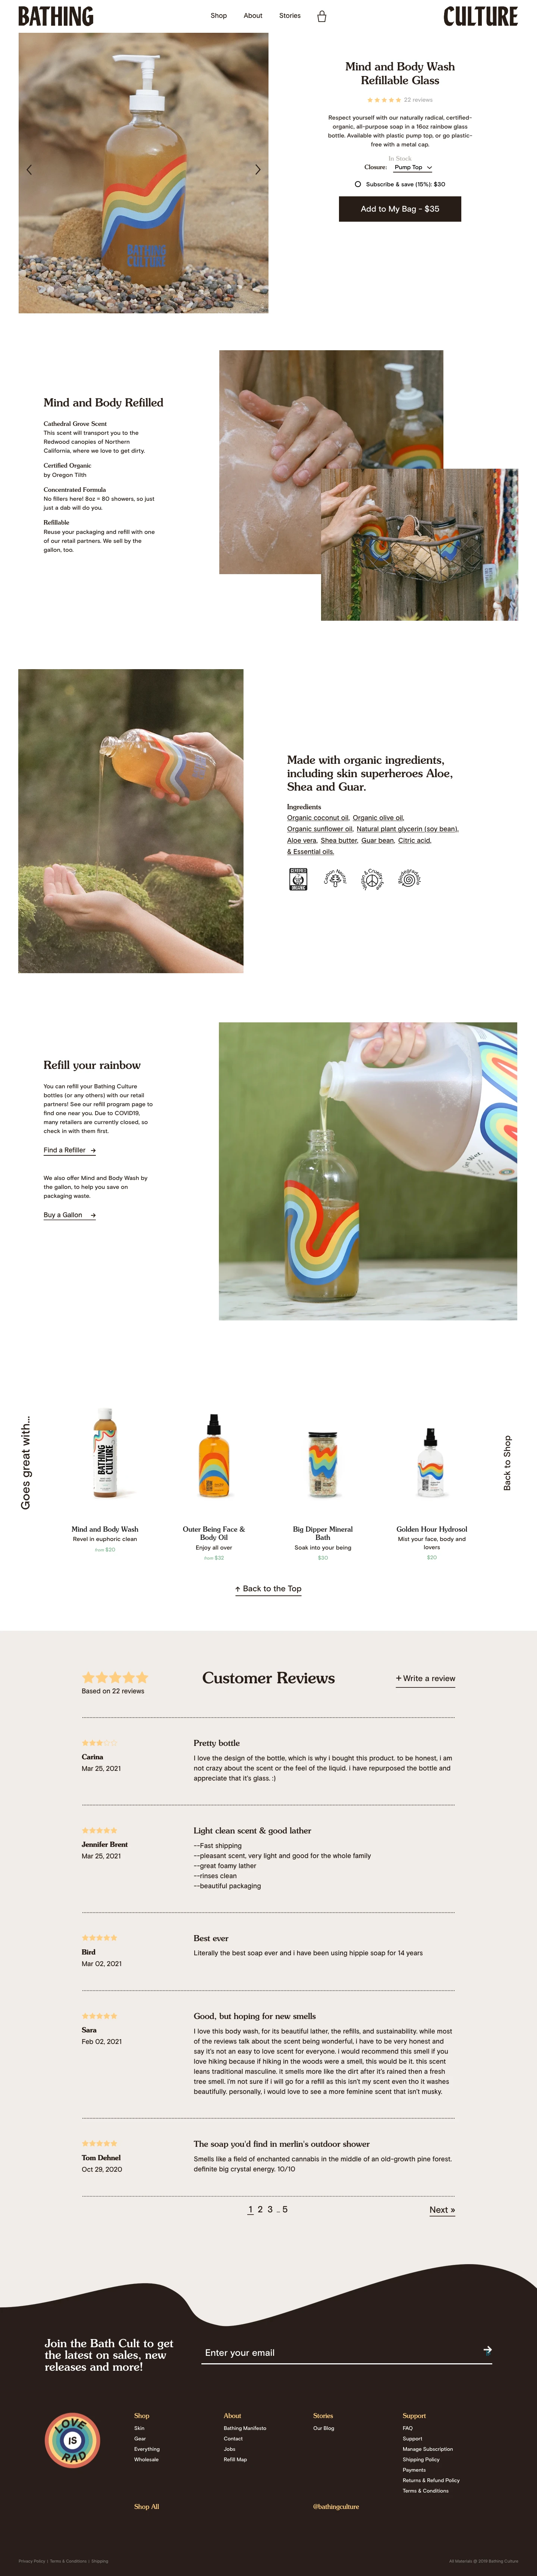 Bathing Culture Landing Page Example: Bathing Culture biodegradable bodywash your natural everyday soap!  Discover radical self care and change the way you approach showers with this organic soap.